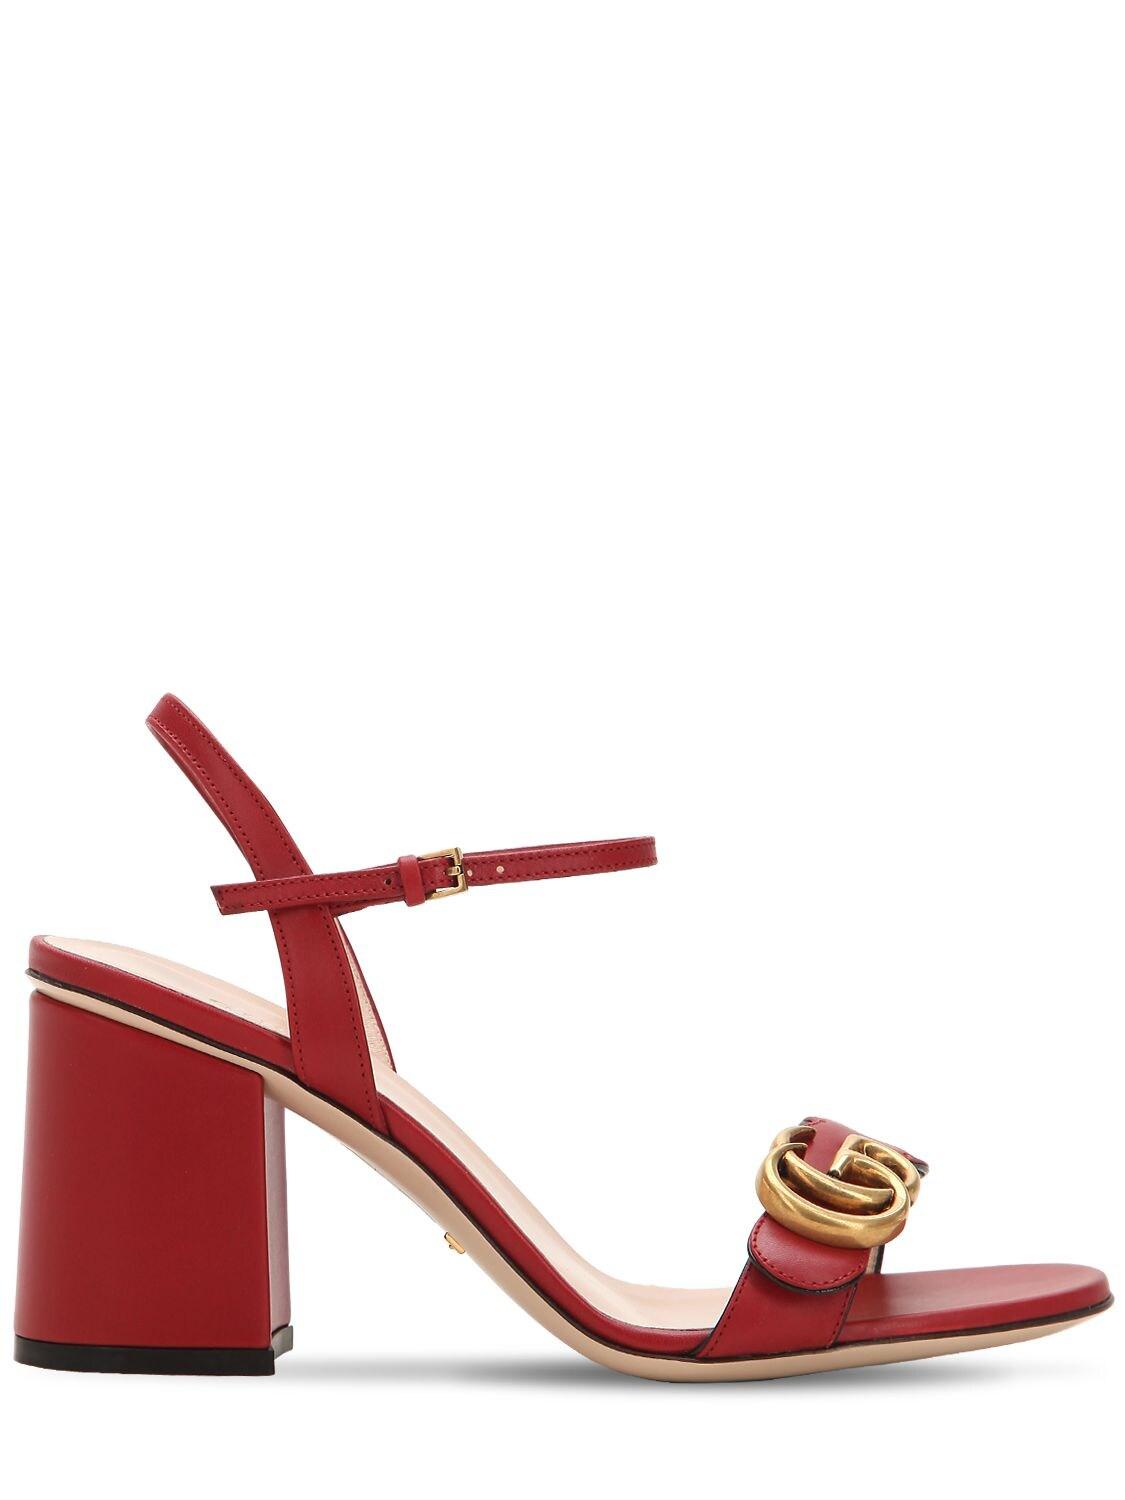 gucci red heels